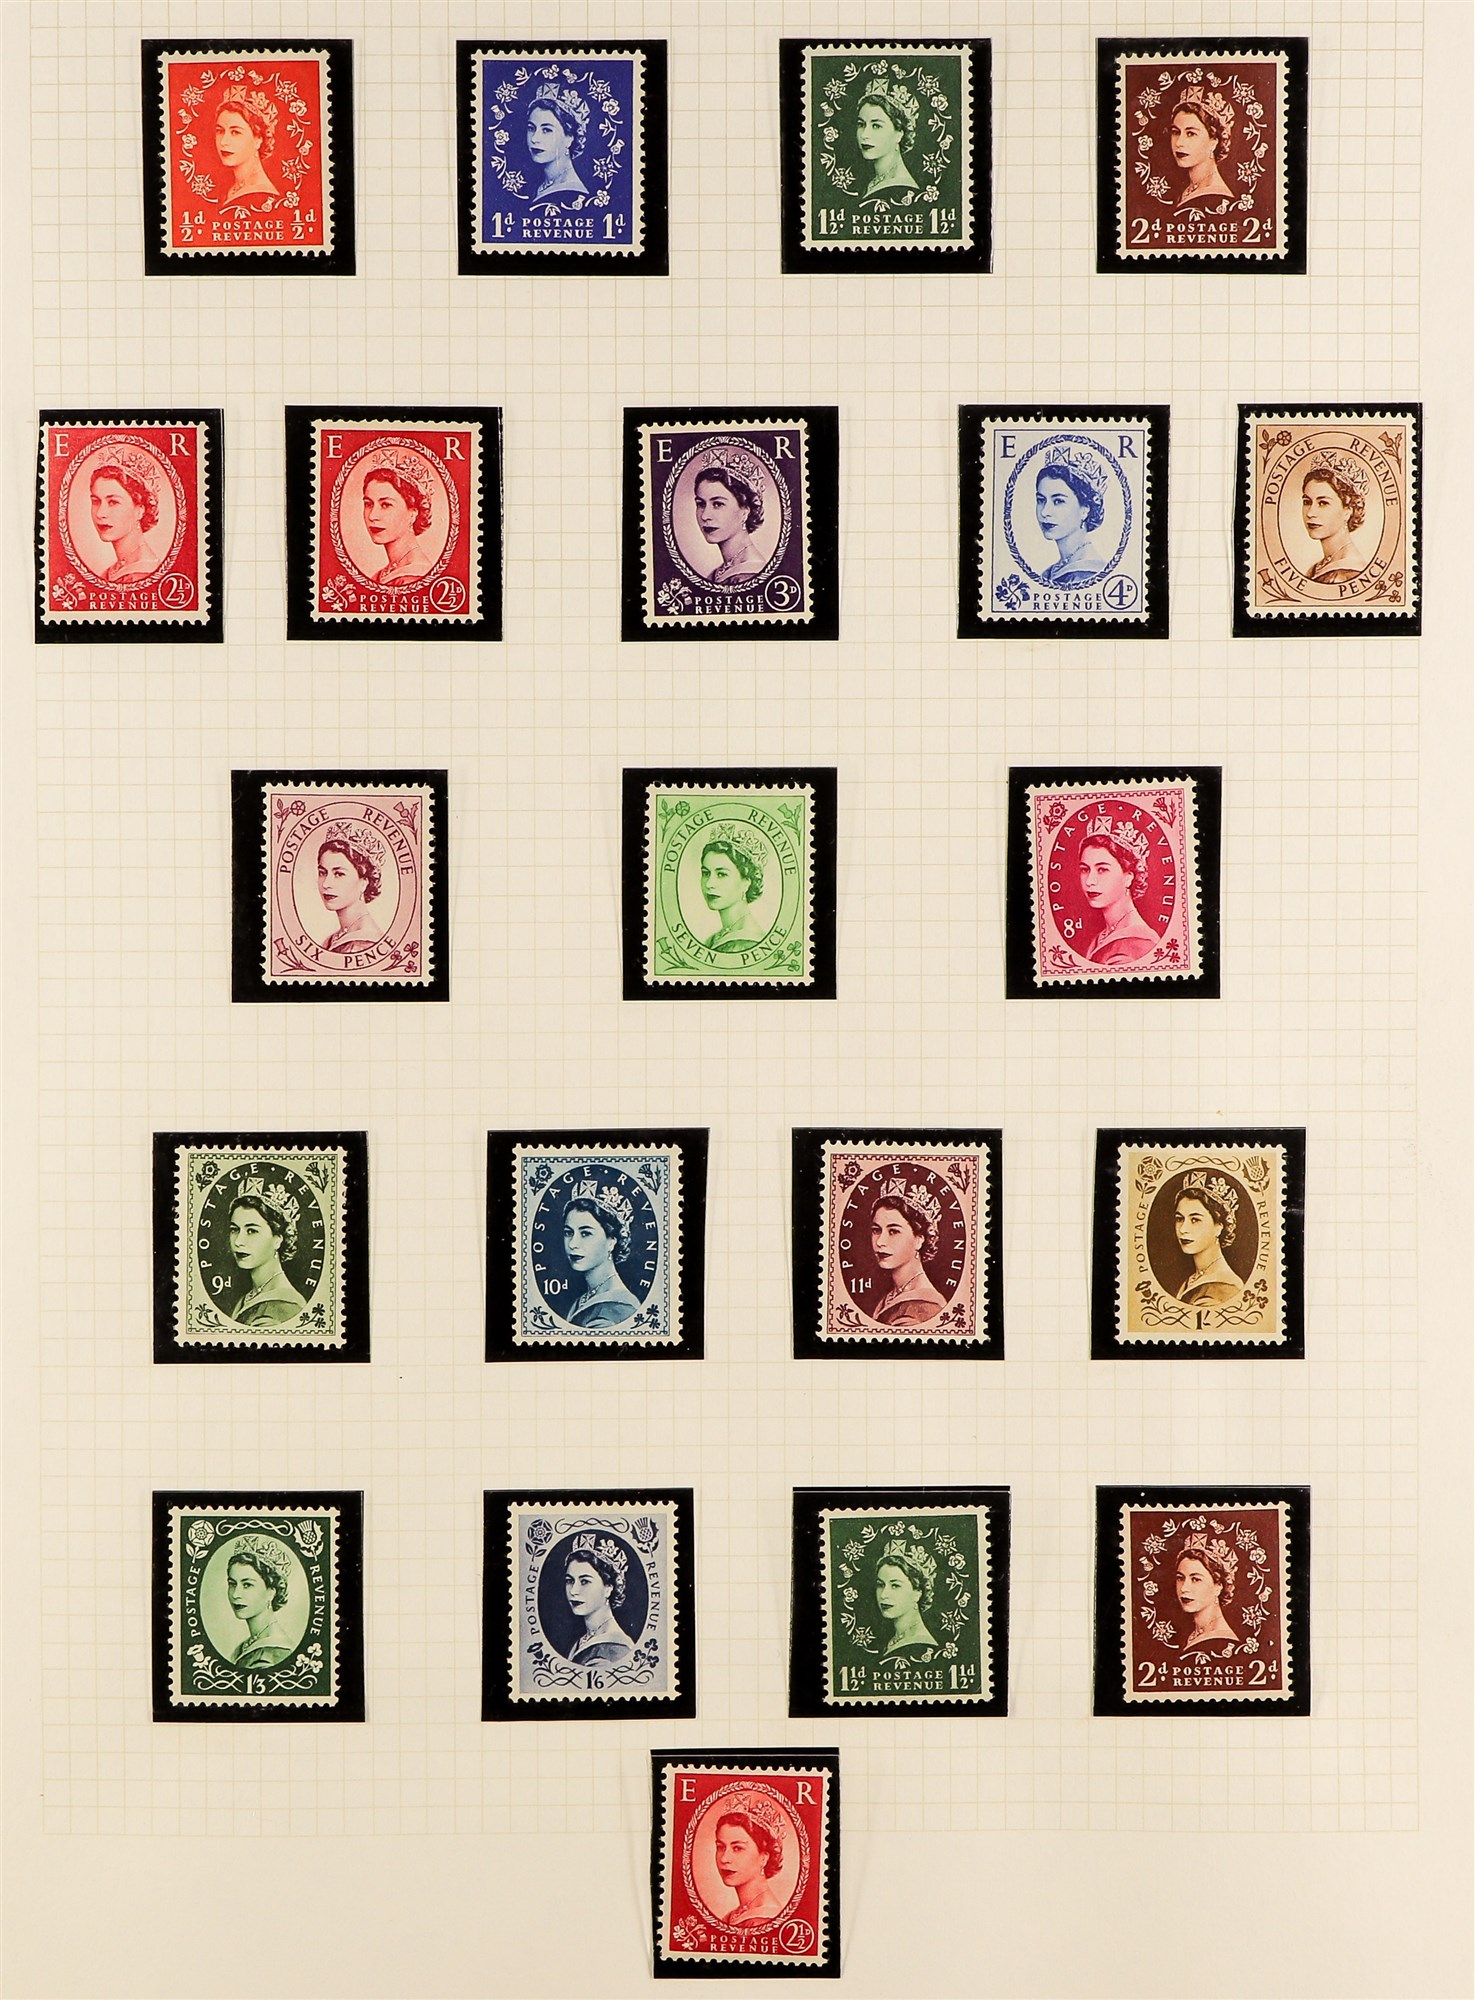 GREAT BRITAIN 1924-1982 MINT COLLECTION in hingeless mounts in two albums, later issues are never - Image 5 of 27